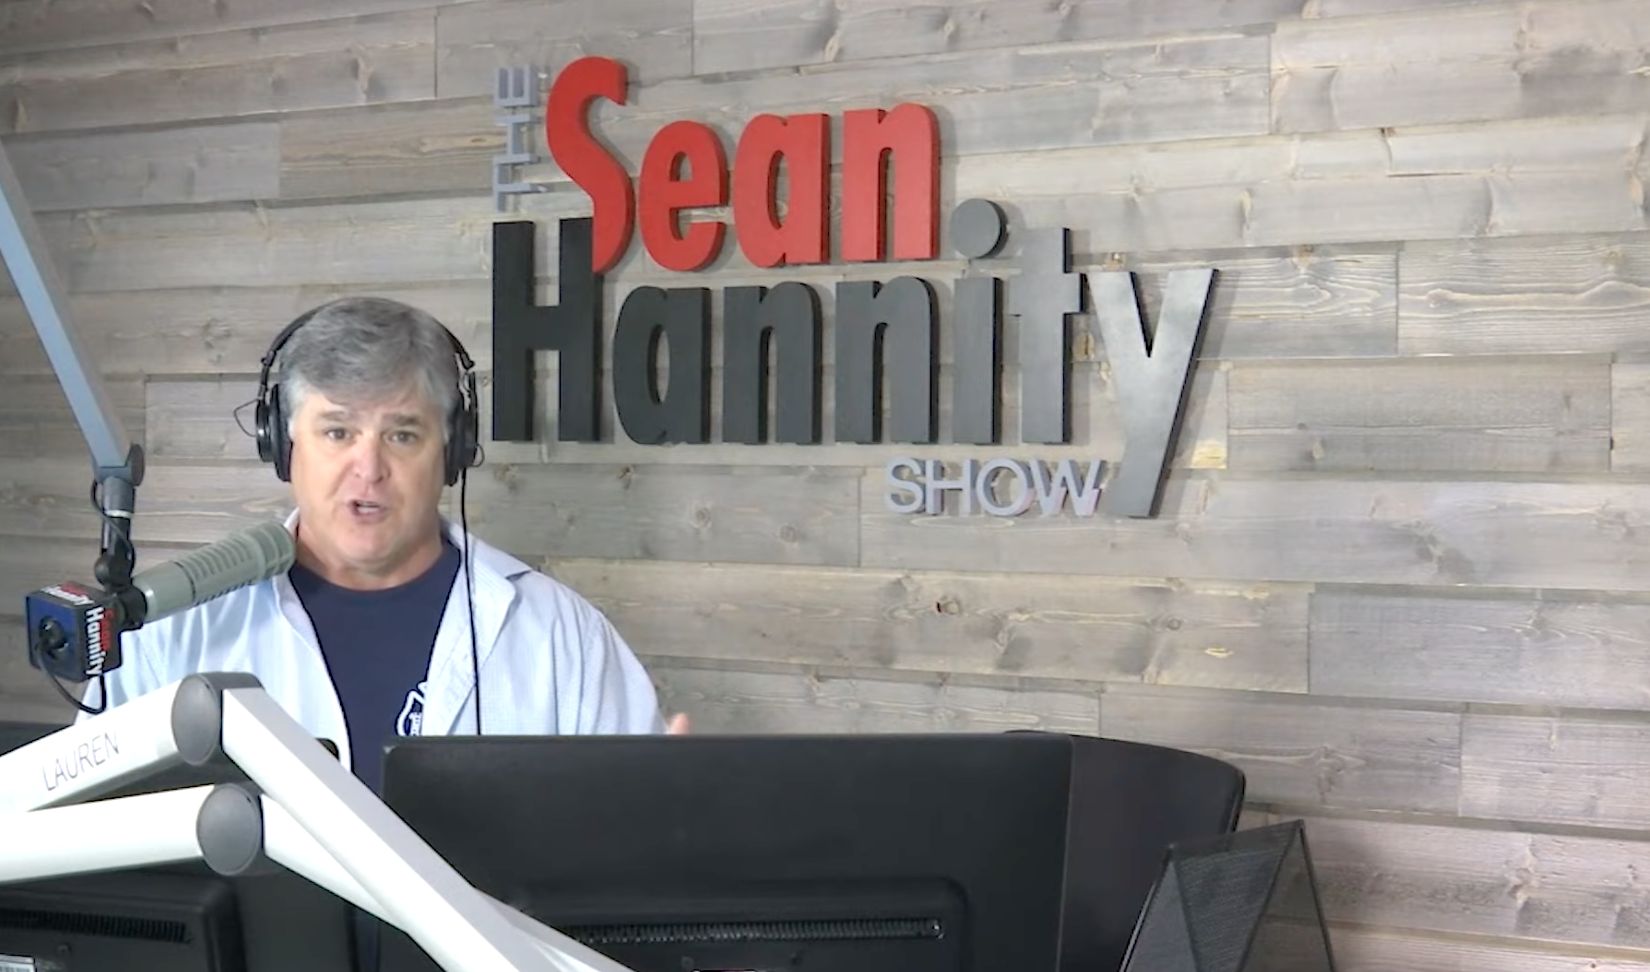 Listen: O'Reilly & Hannity Discuss Covid, Omicron and Vaccinations